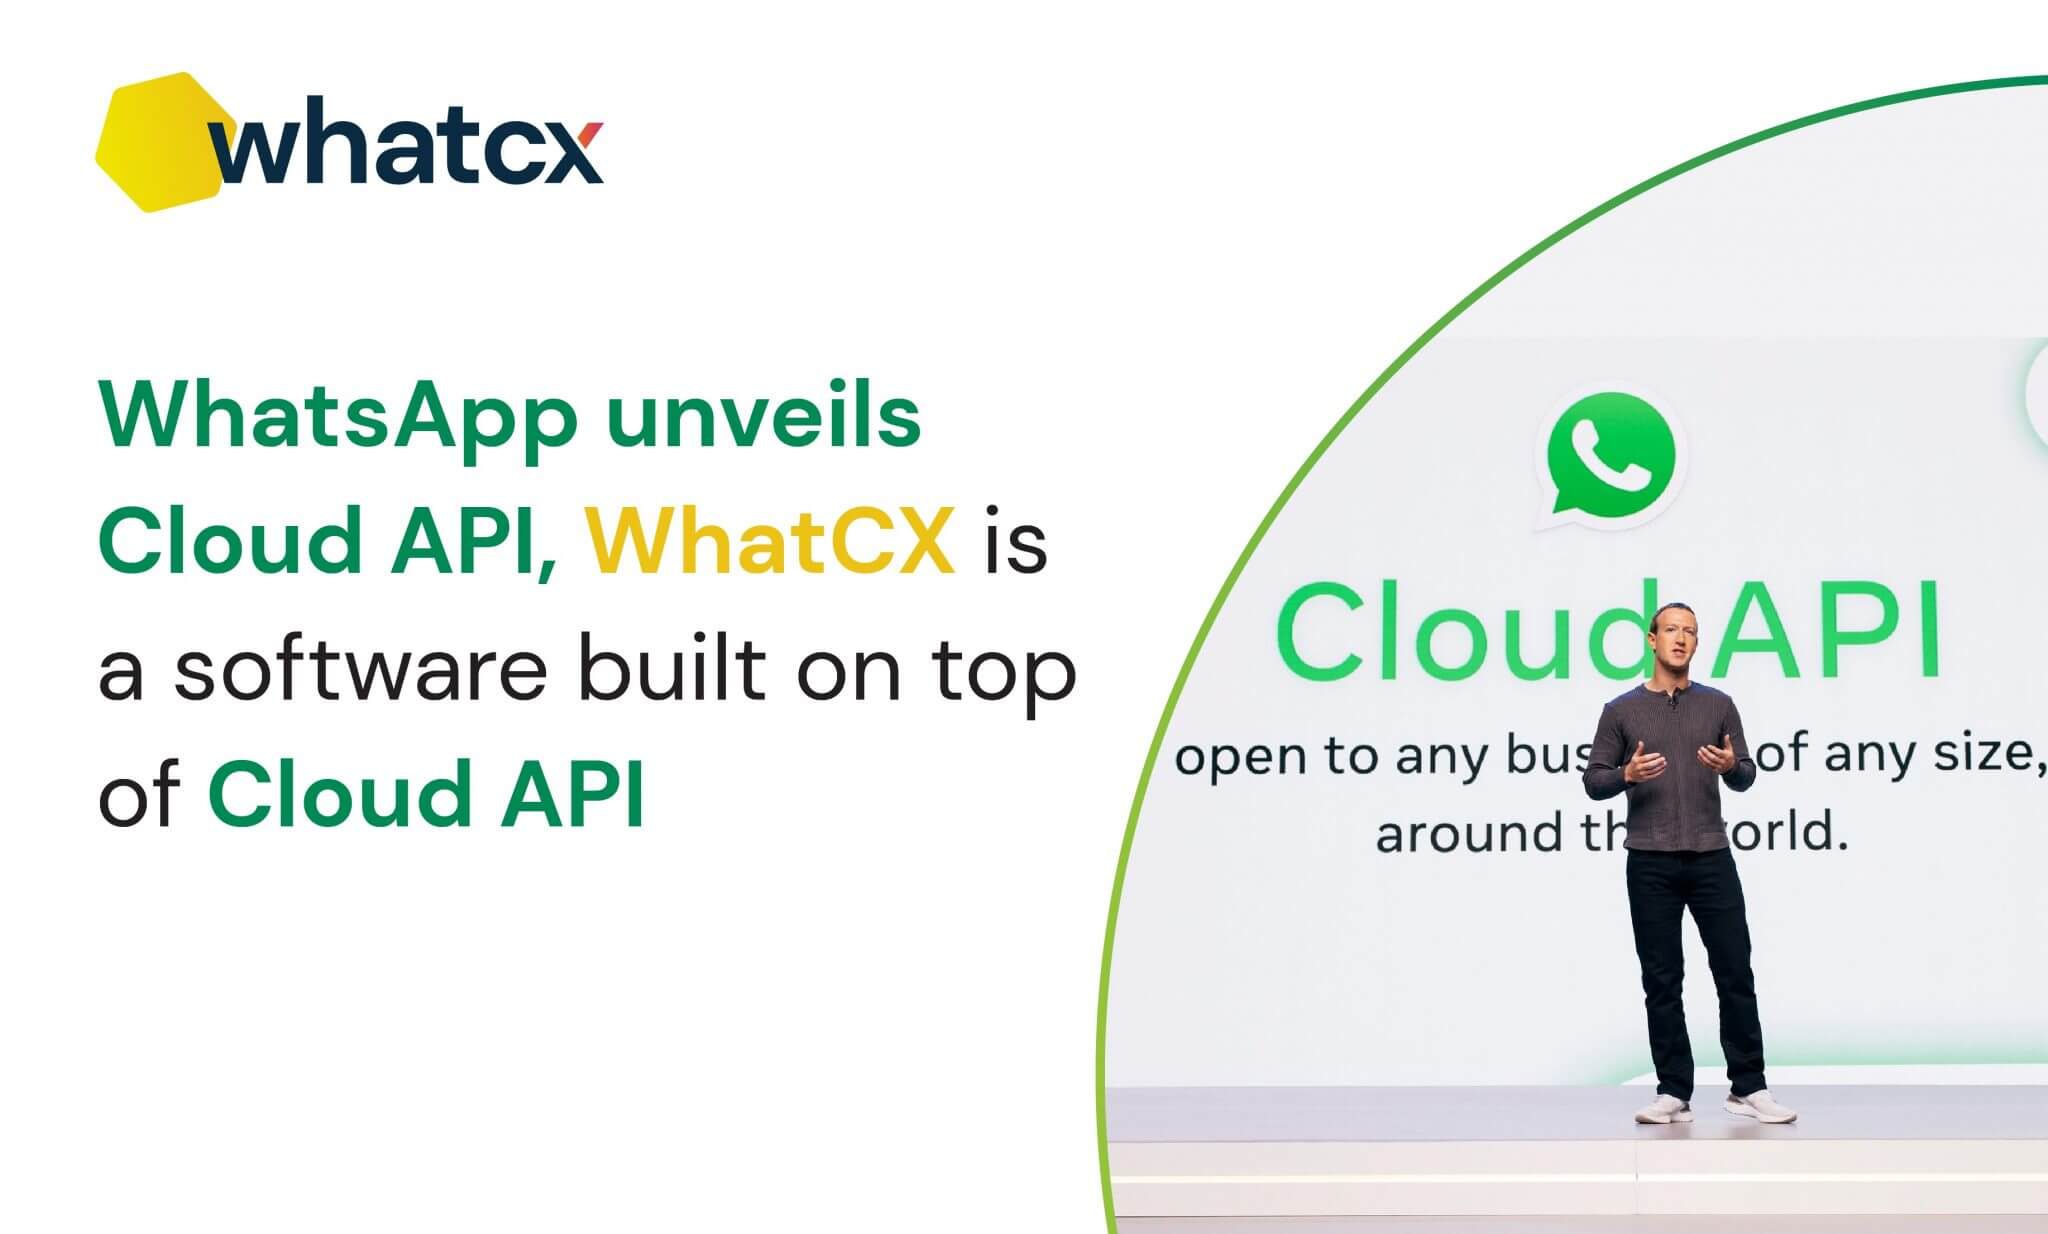 WhatsApp unveils Cloud API: How DashCX is a CRM built on top of the cloud API